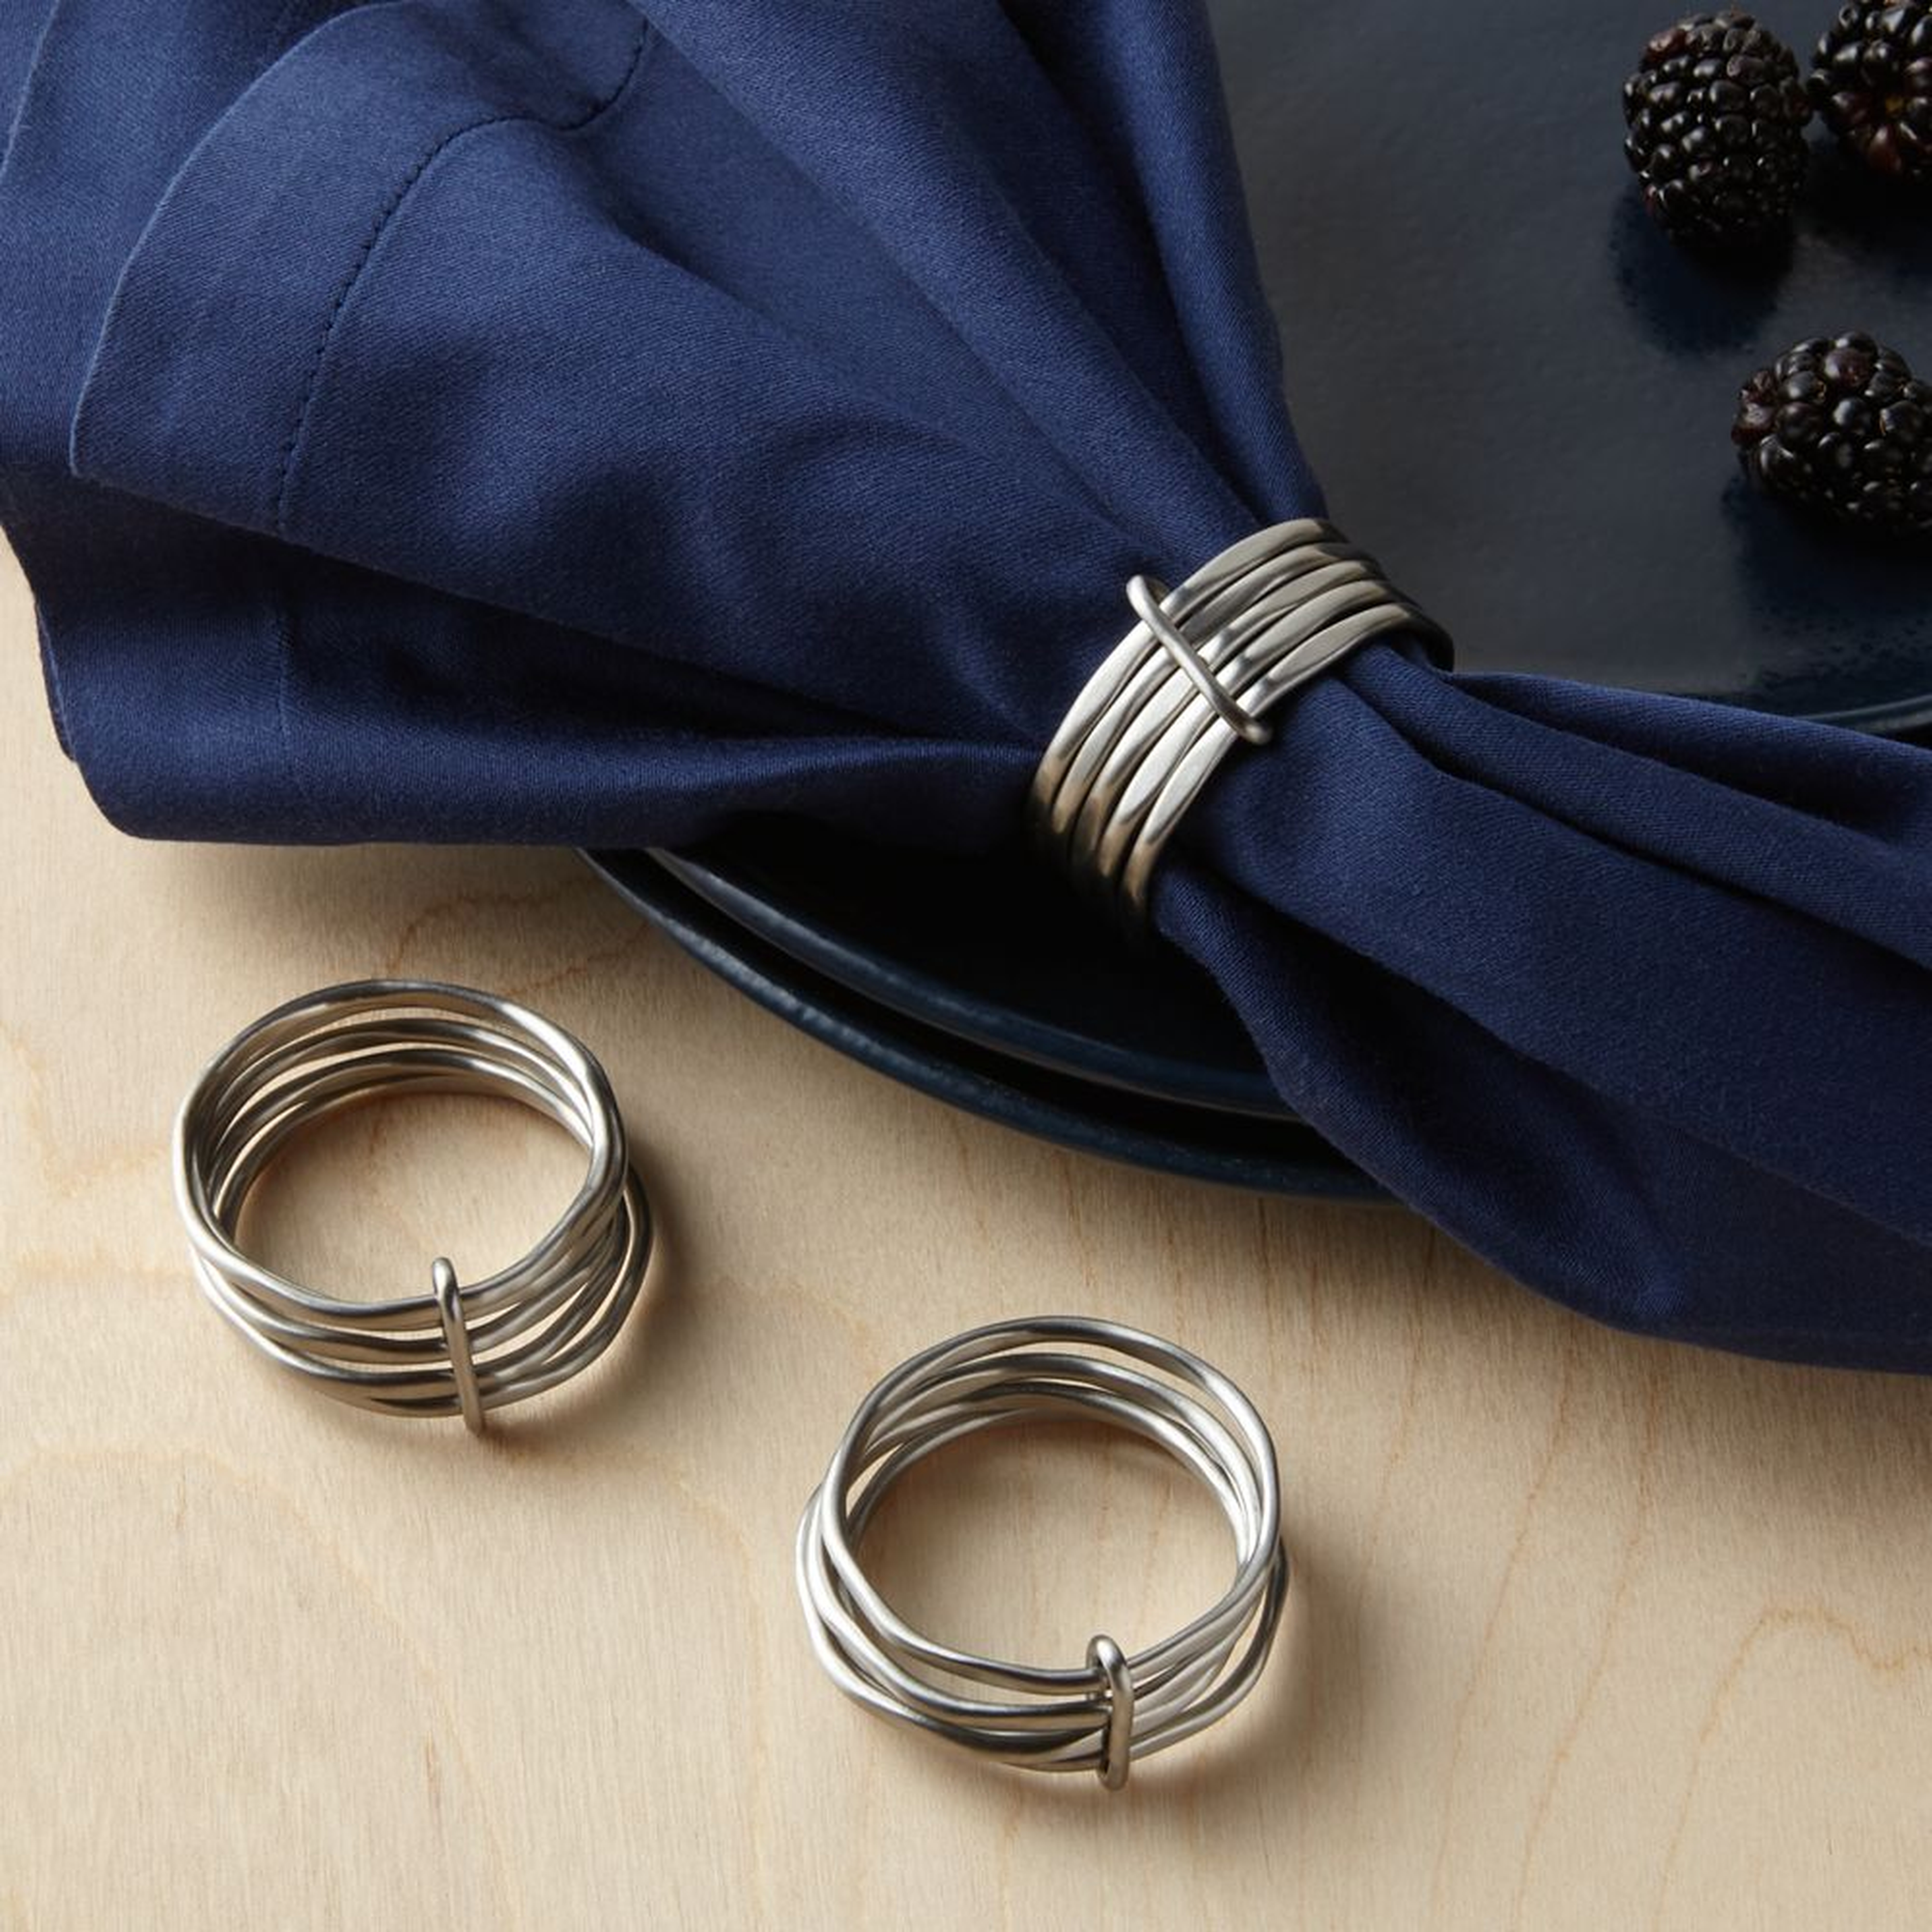 5-Ring Silver Napkin Ring - Crate and Barrel